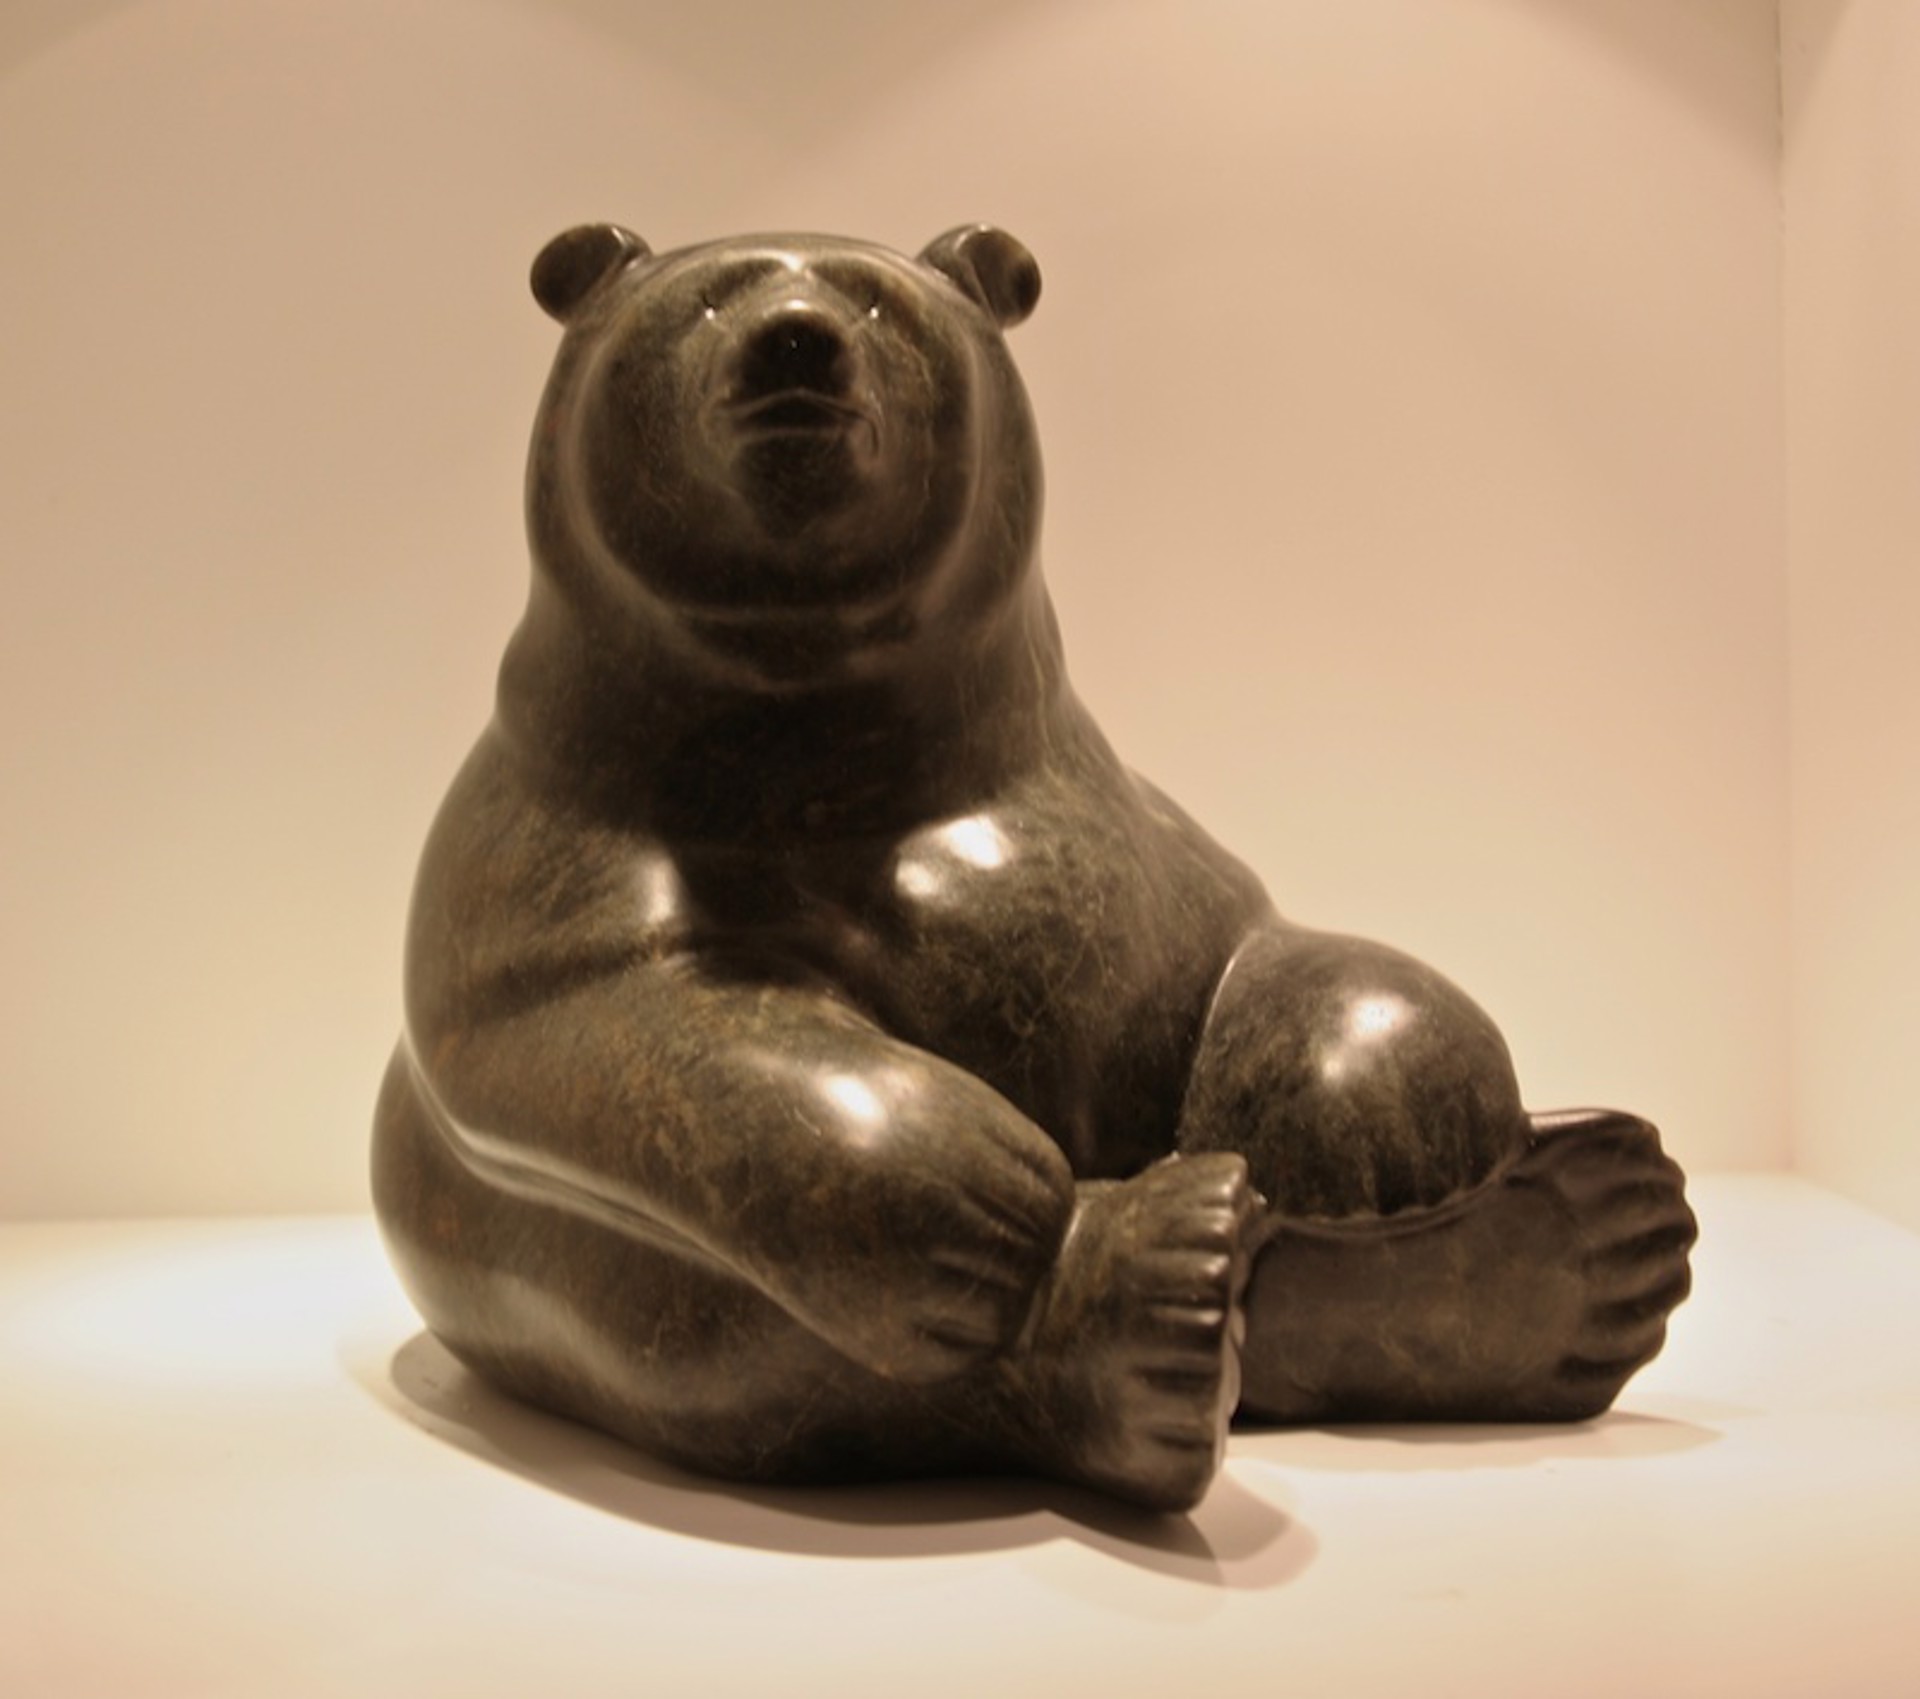 Sitting up Bear by Les Dunlop